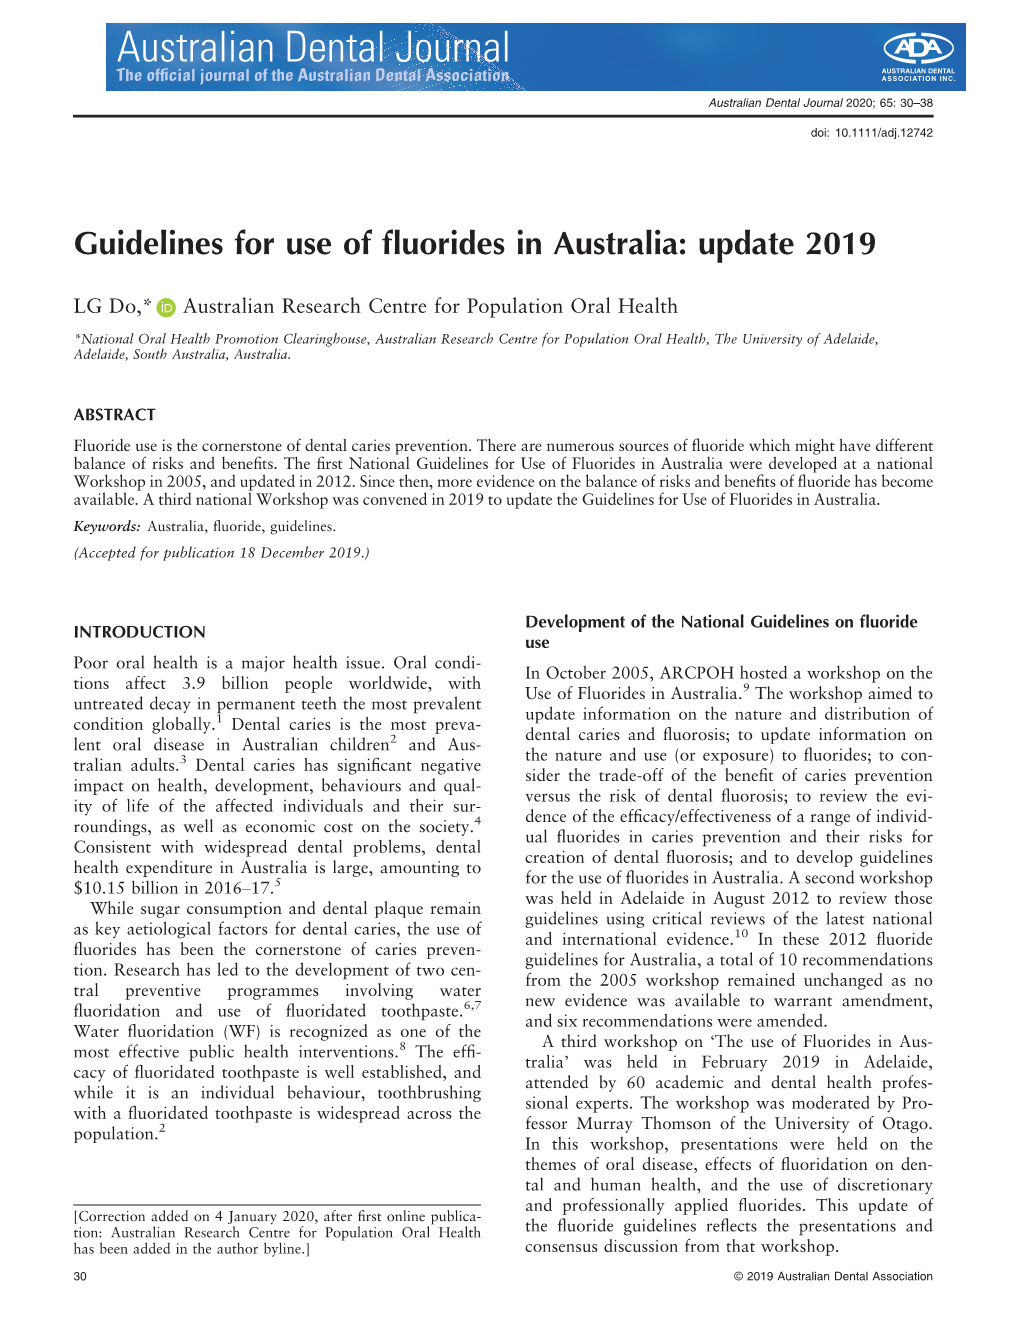 Guidelines for Use of Fluorides in Australia Were Developed at a National Workshop in 2005, and Updated in 2012